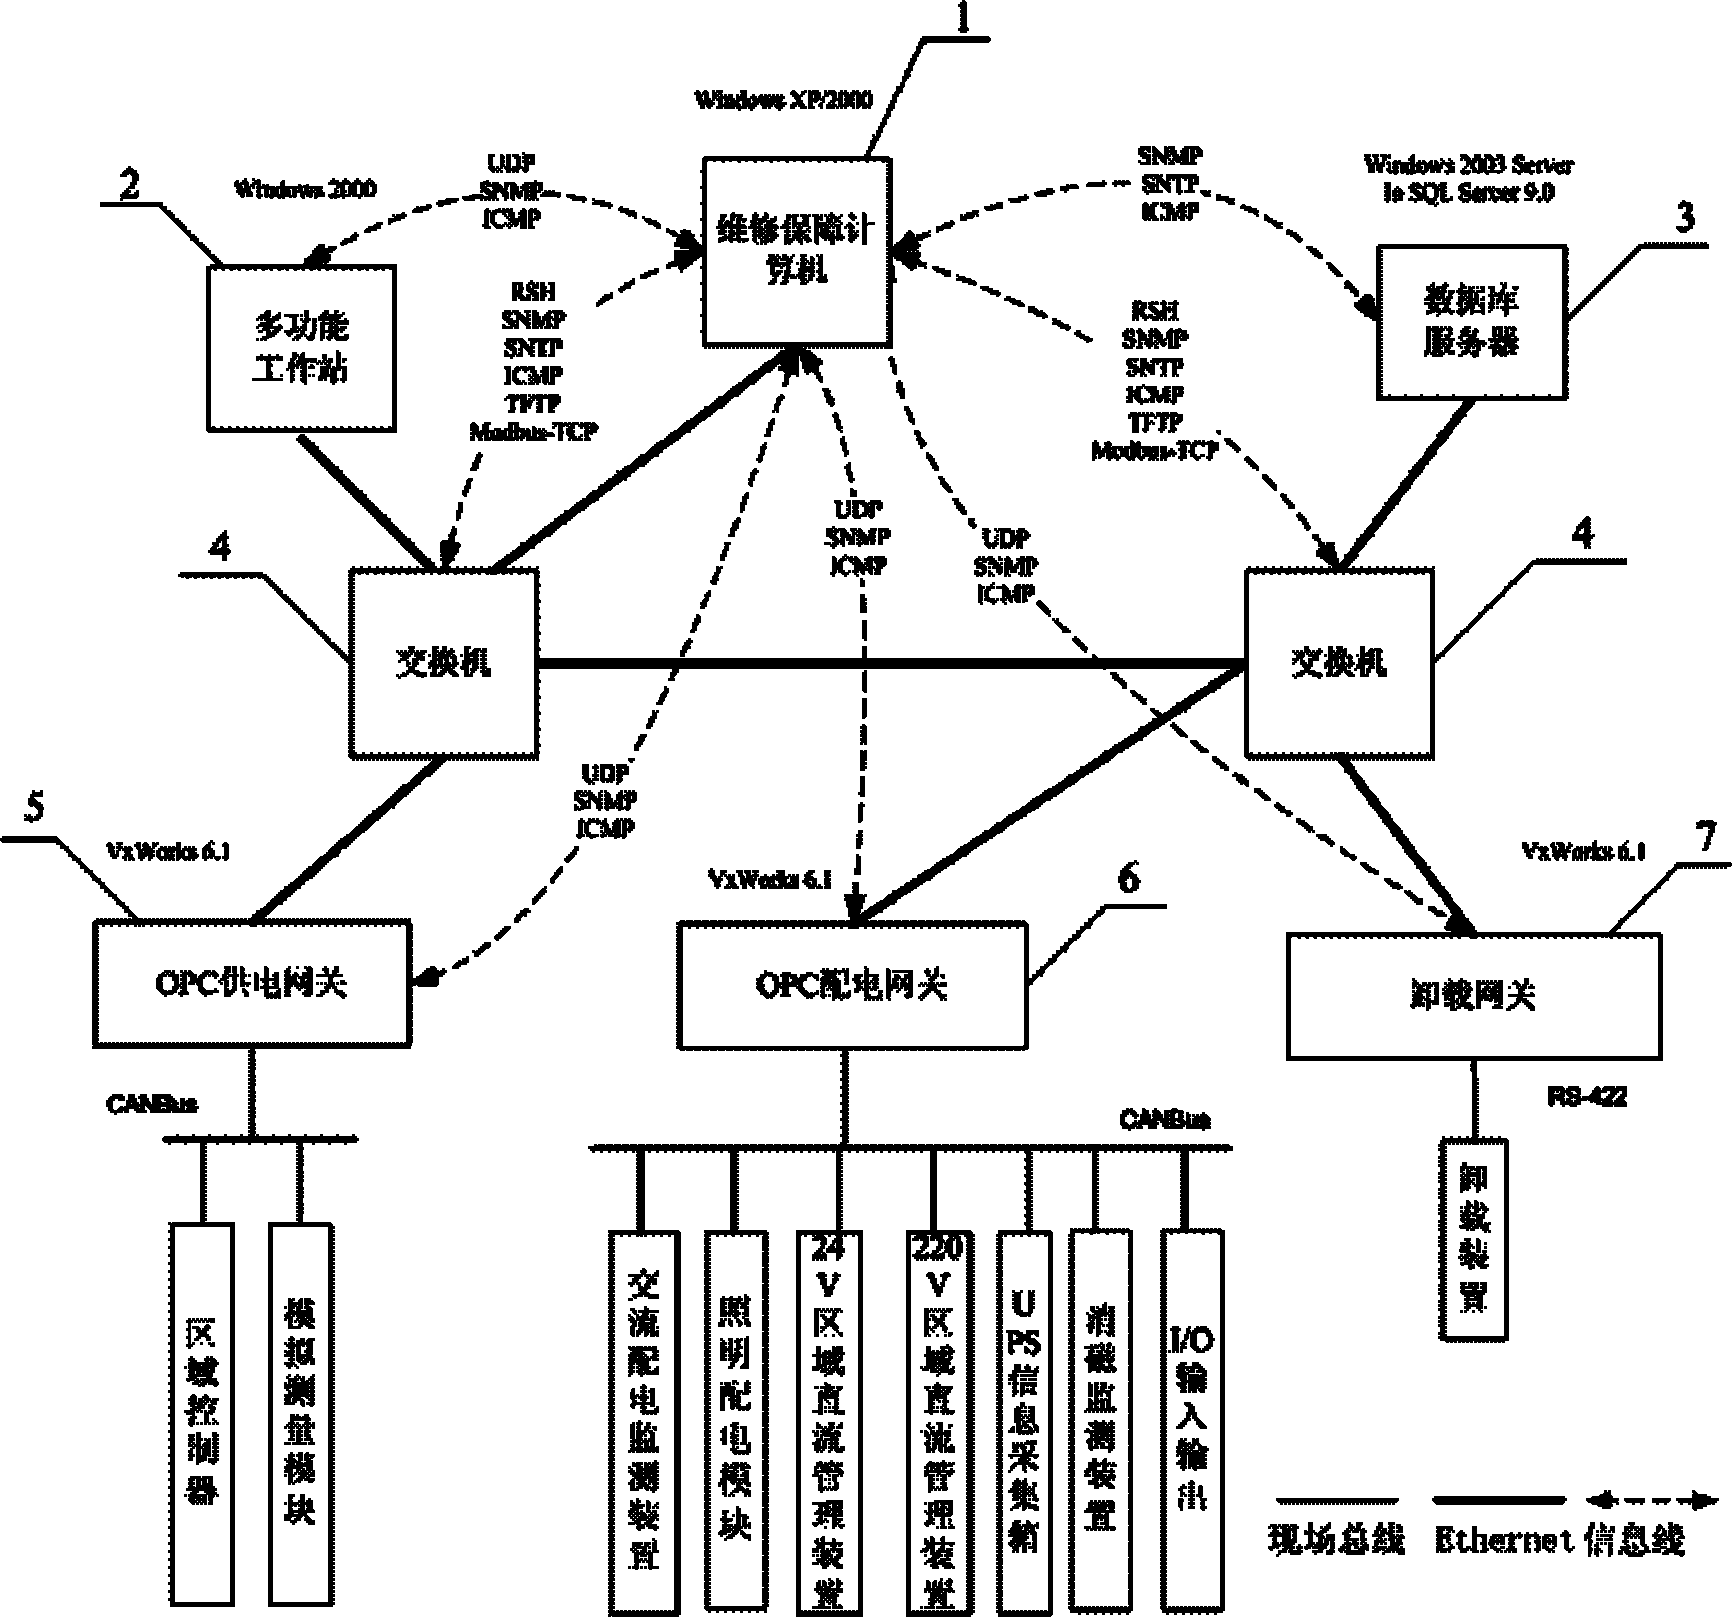 Method and system for monitoring state of ship power monitoring network